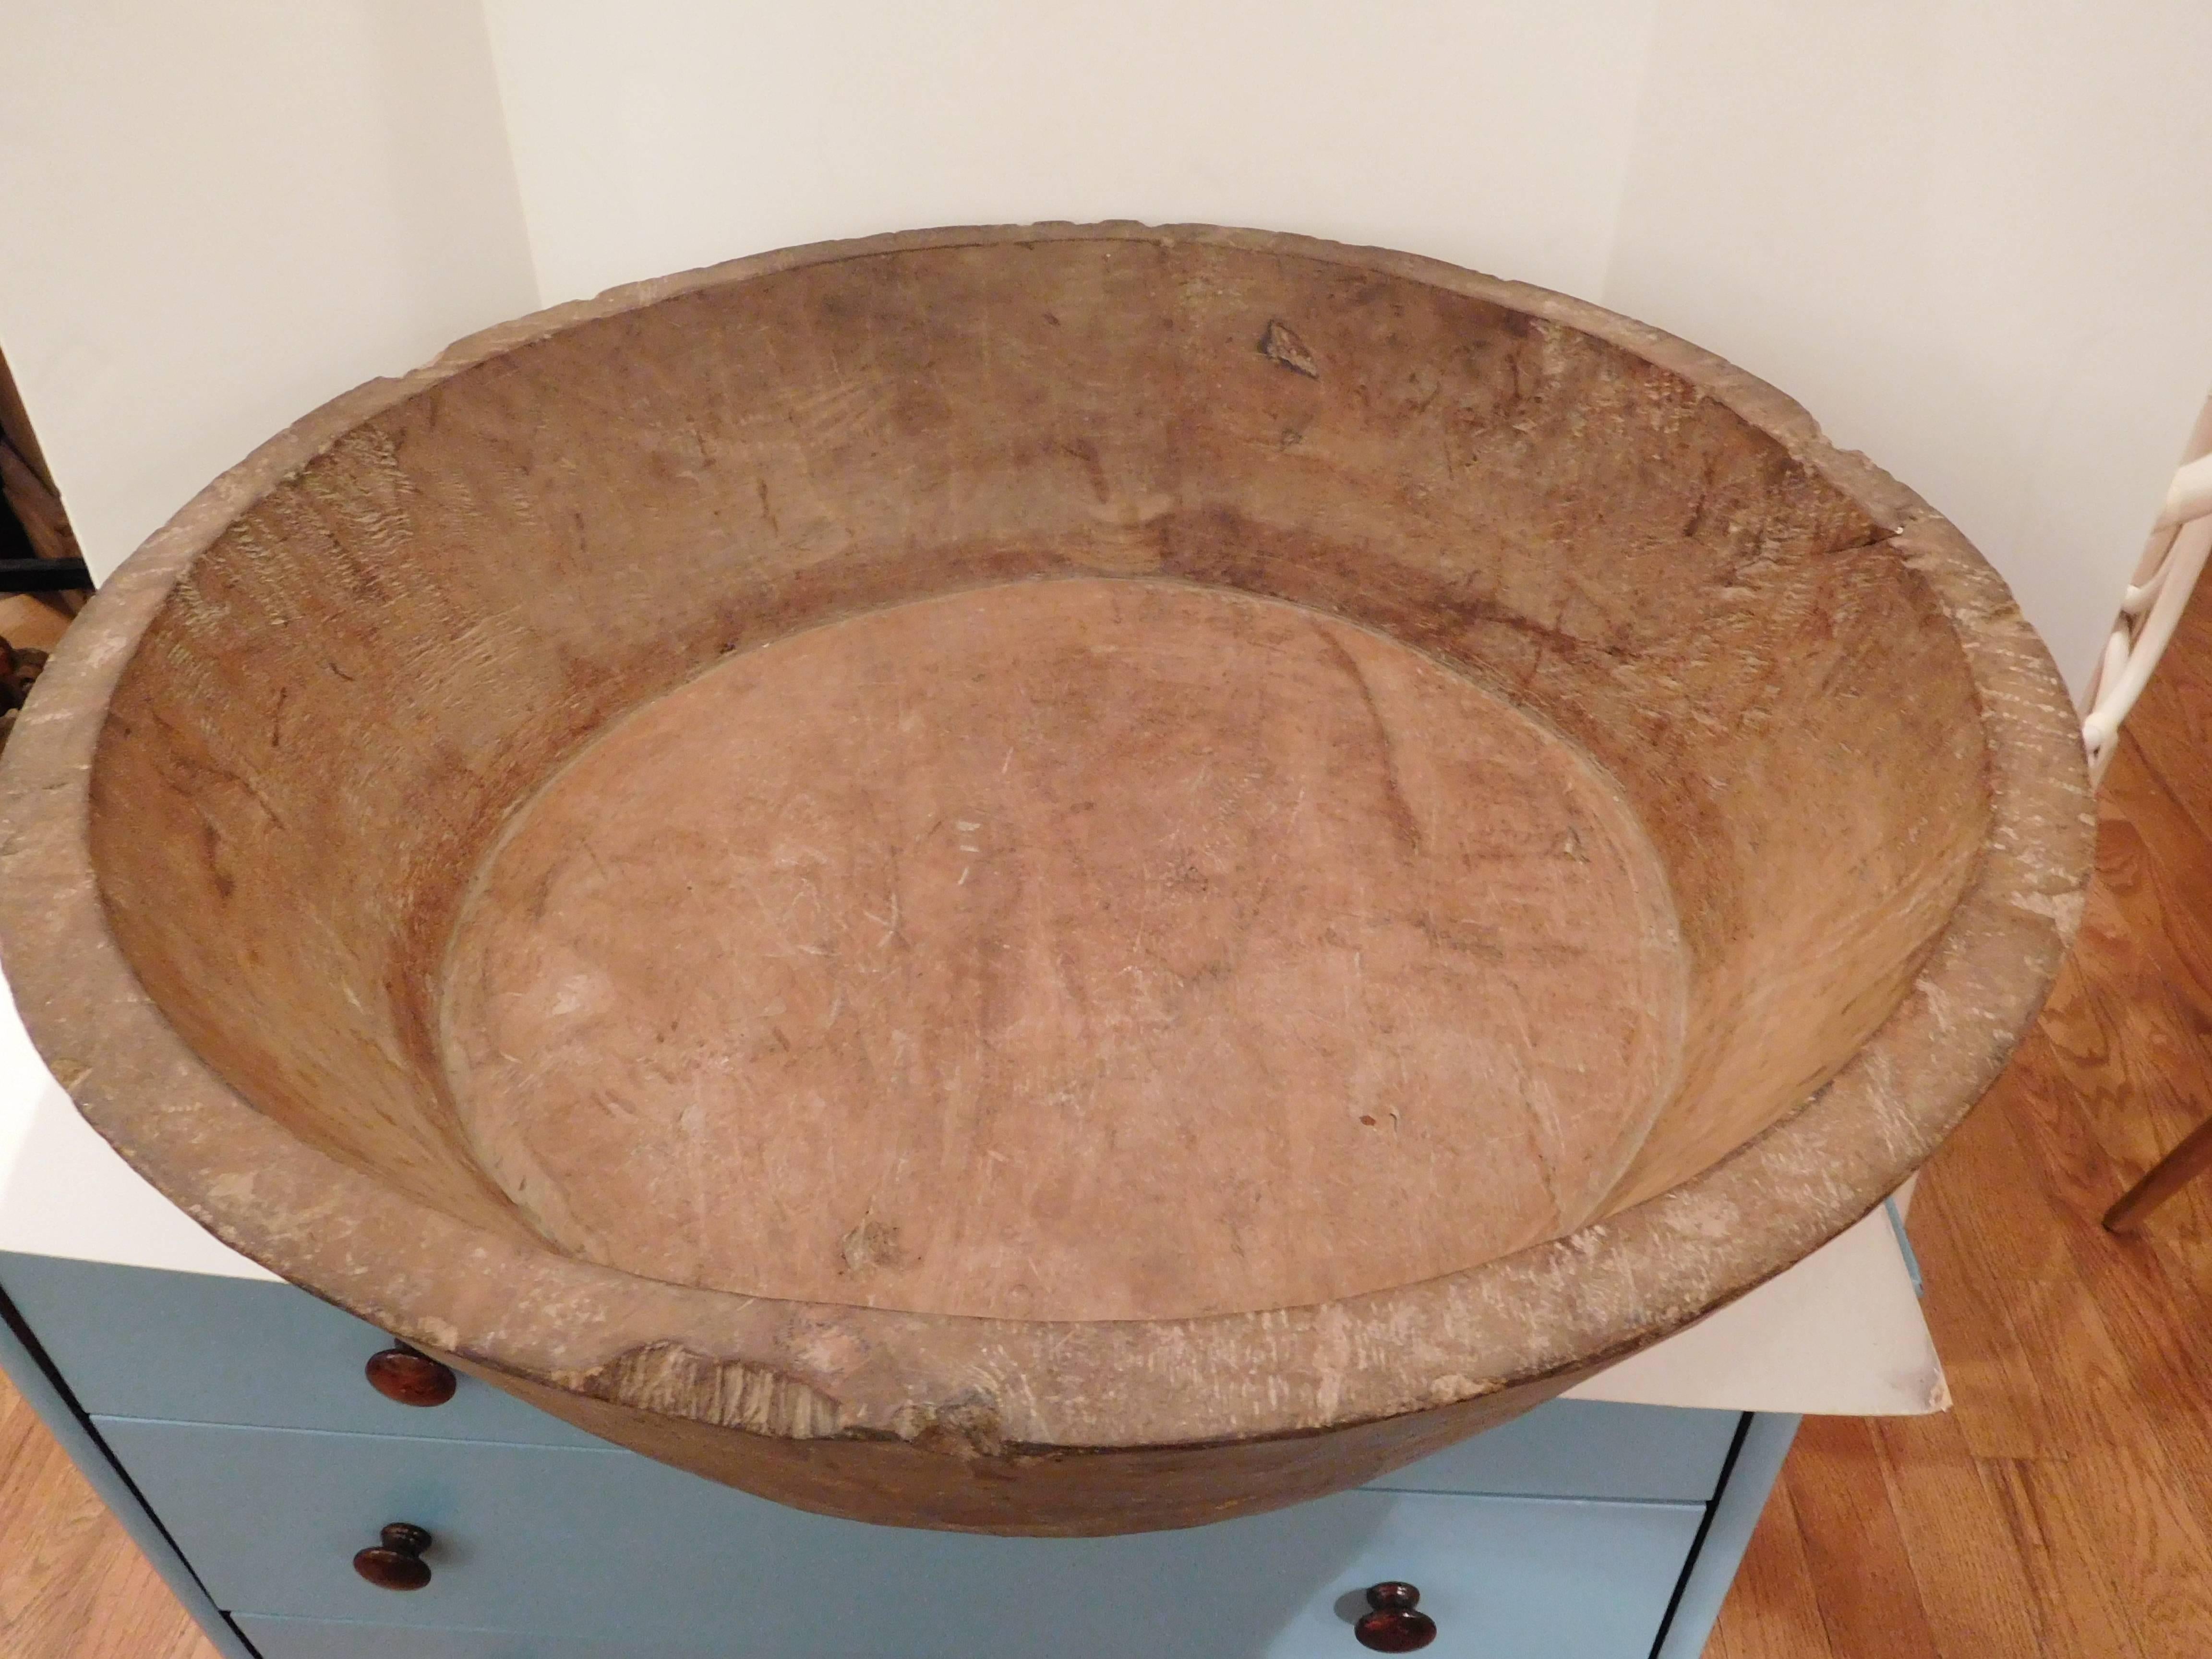 Balkan Over-Sized Late 19th Century Turkish Wooden Vessel